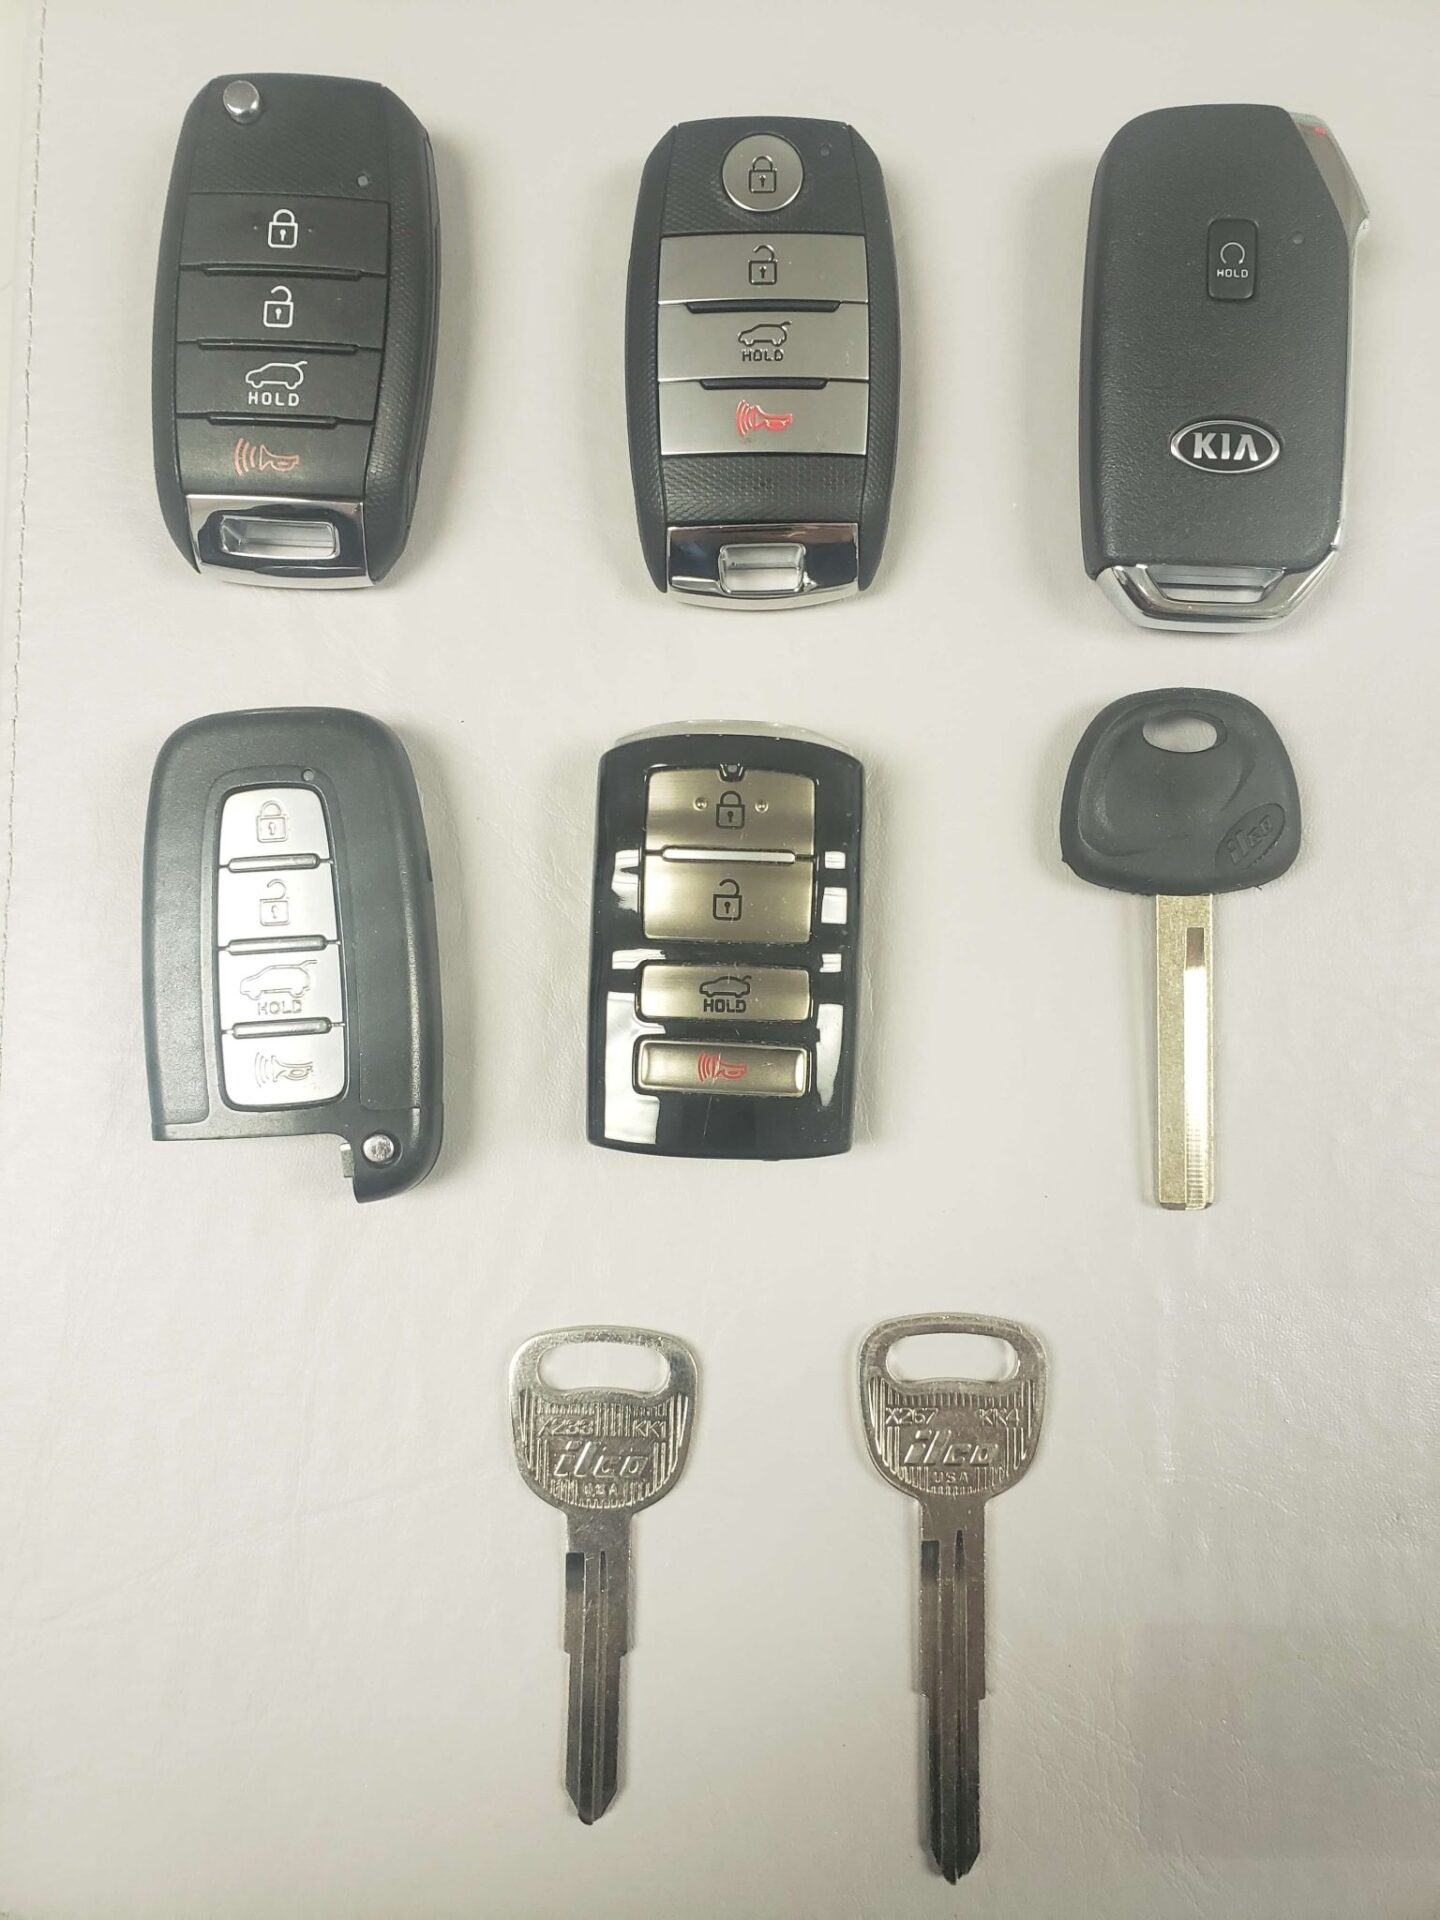 Kia Rio Key Replacement What To Do, Options, Costs & More